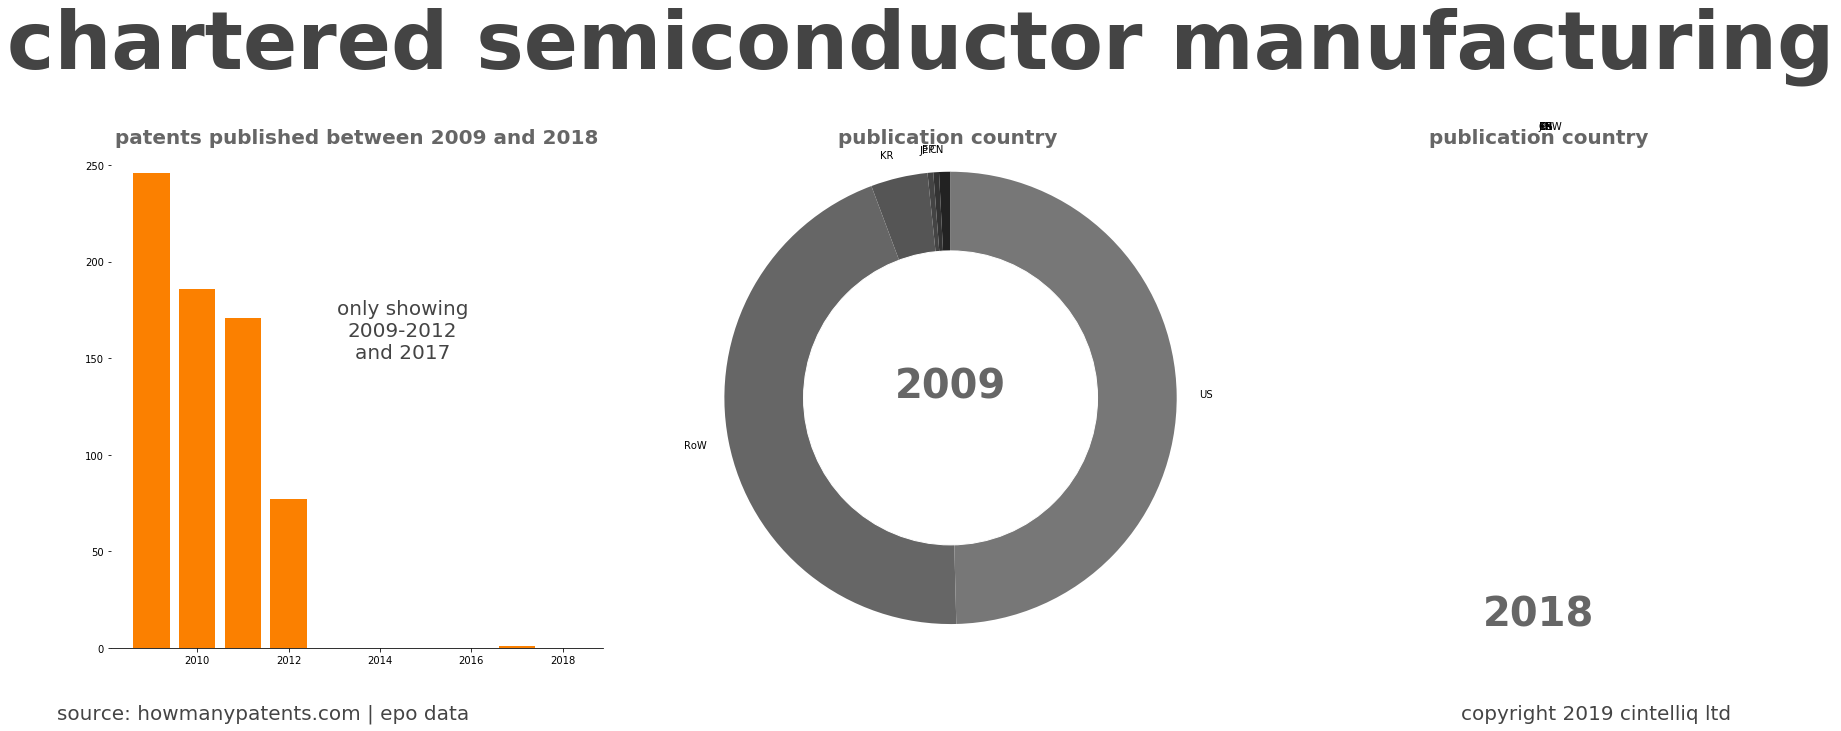 summary of patents for Chartered Semiconductor Manufacturing